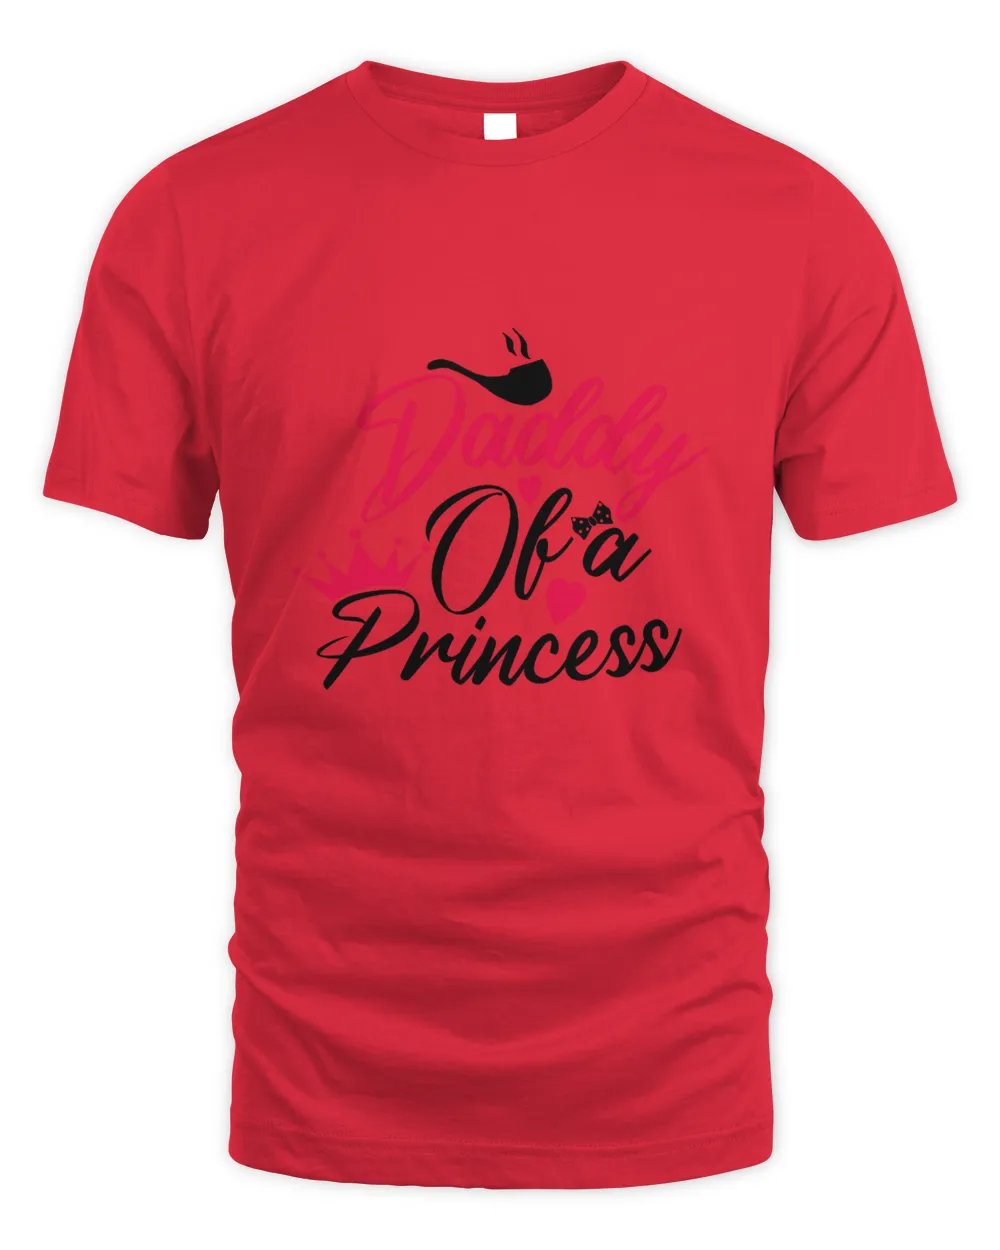 Daddy Of A Princess Fathers Day T shirts